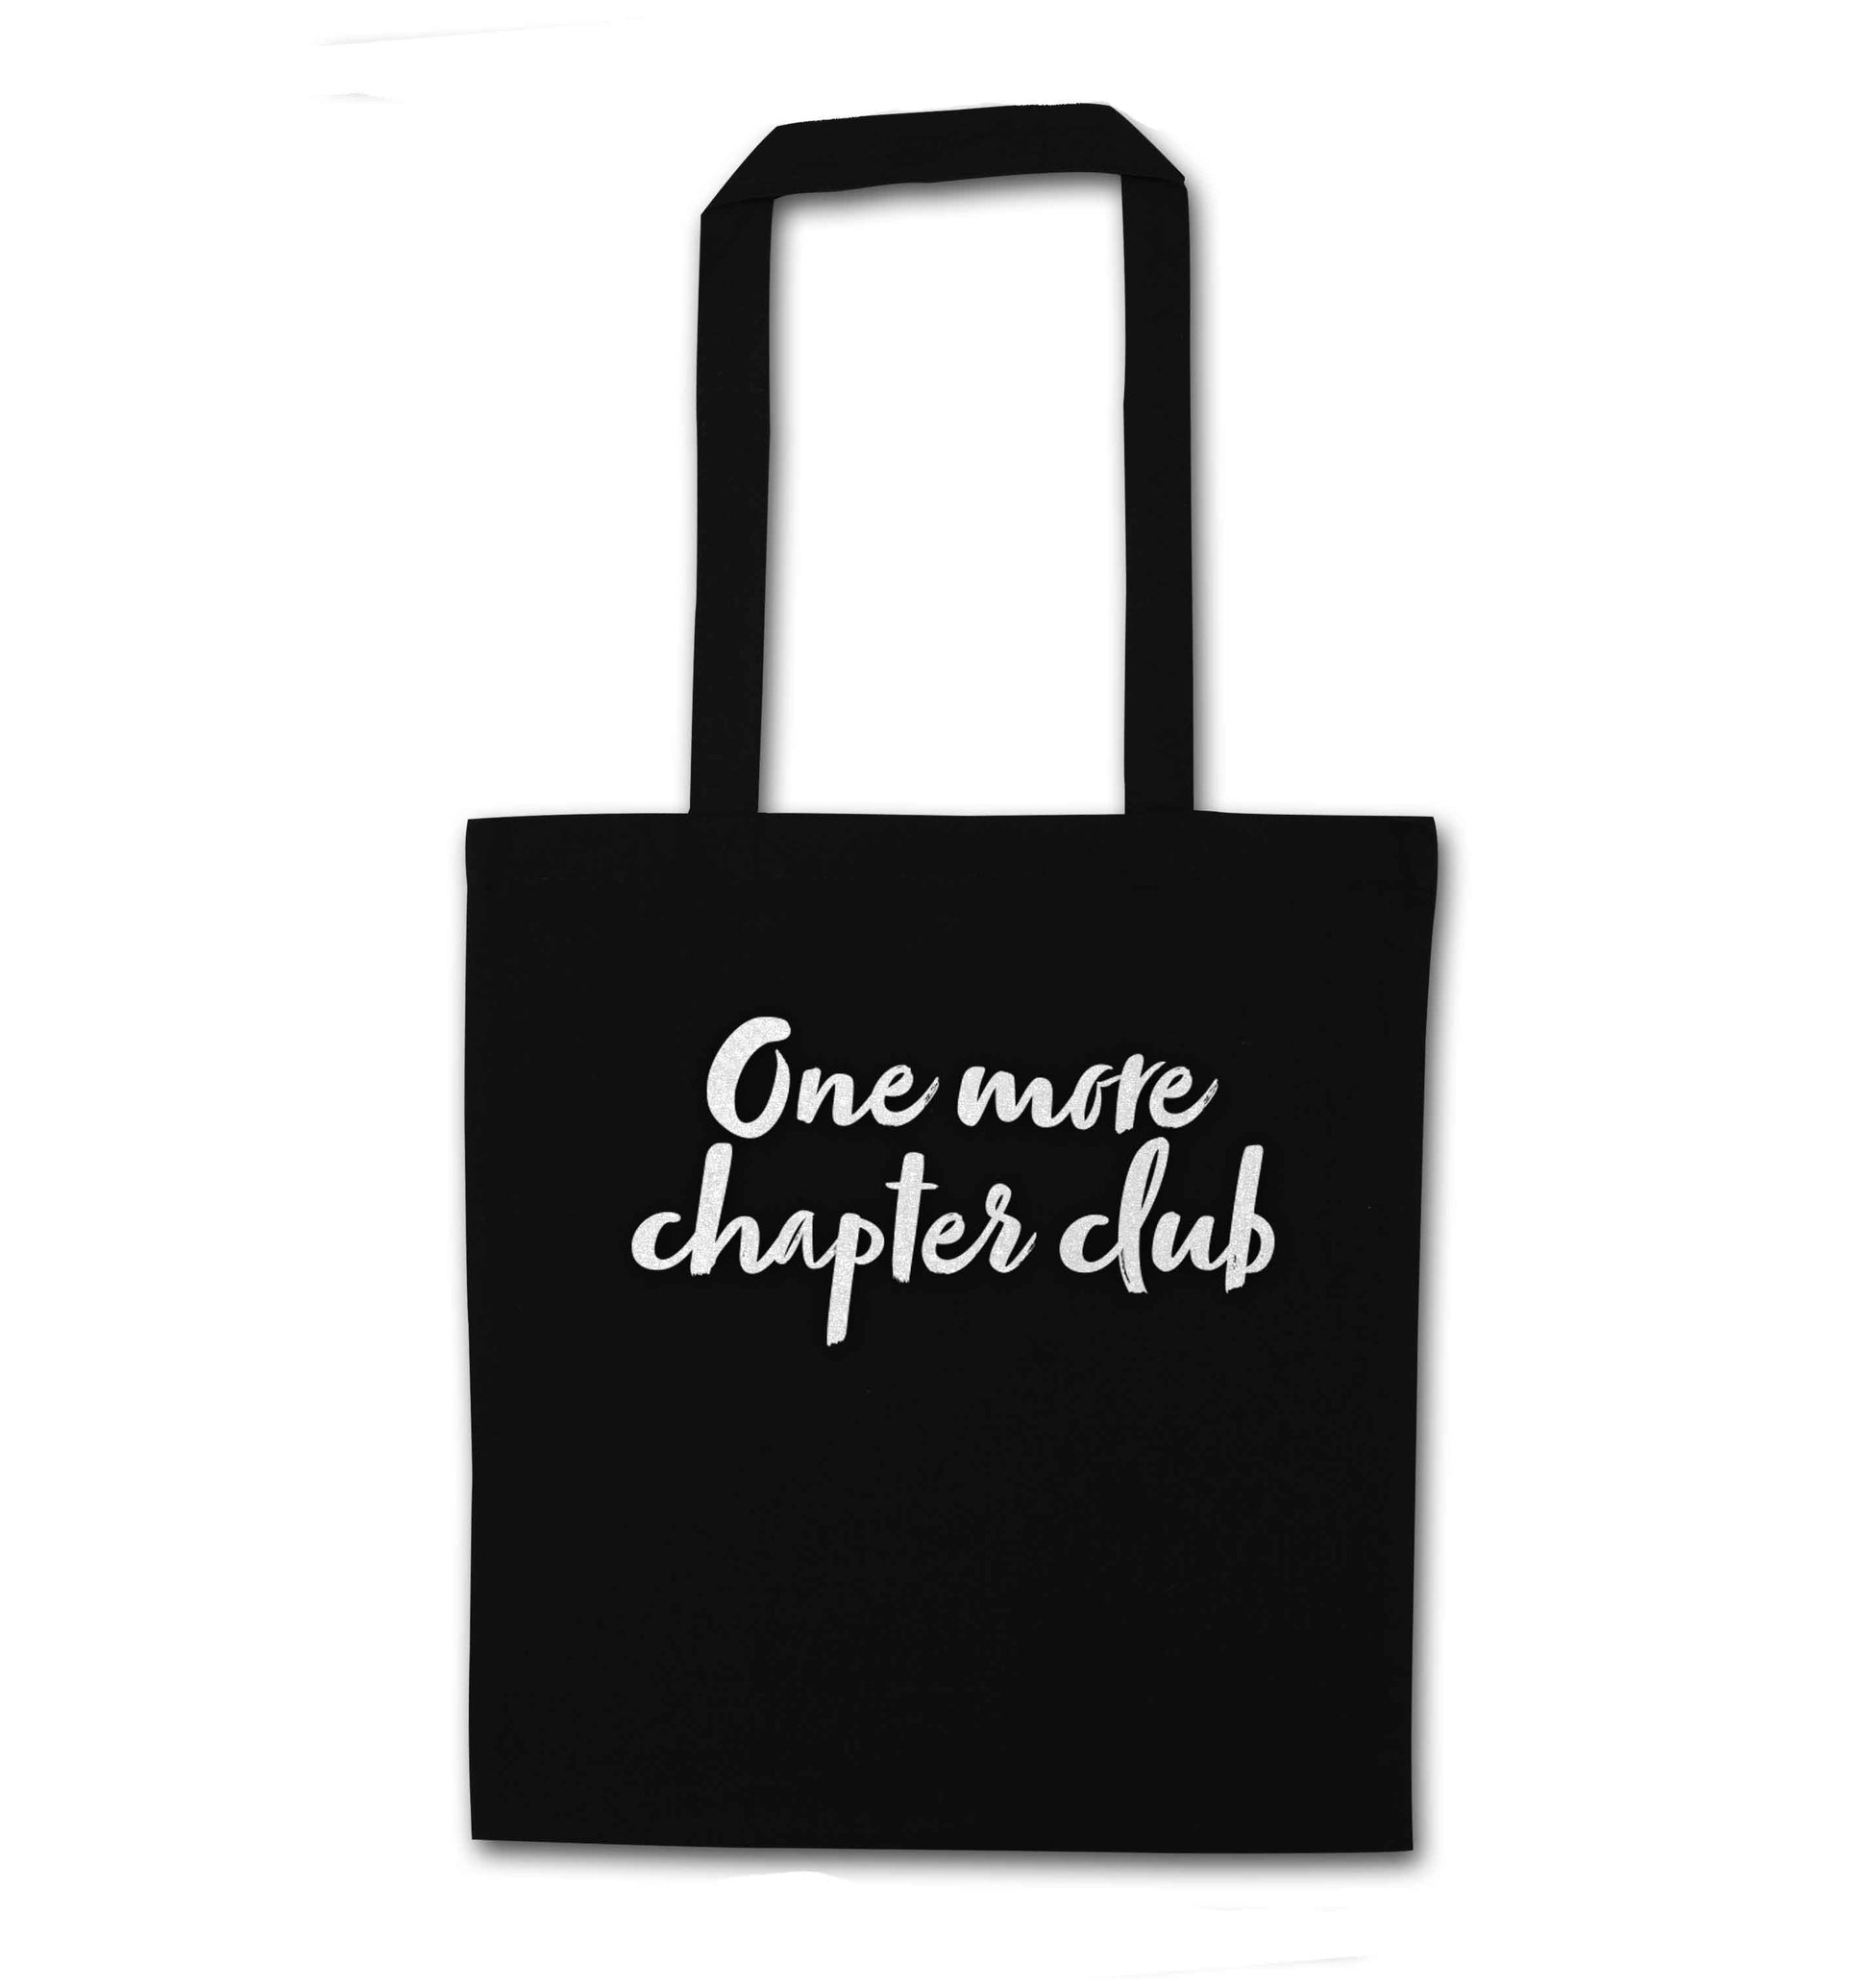 One more chapter club Kit black tote bag